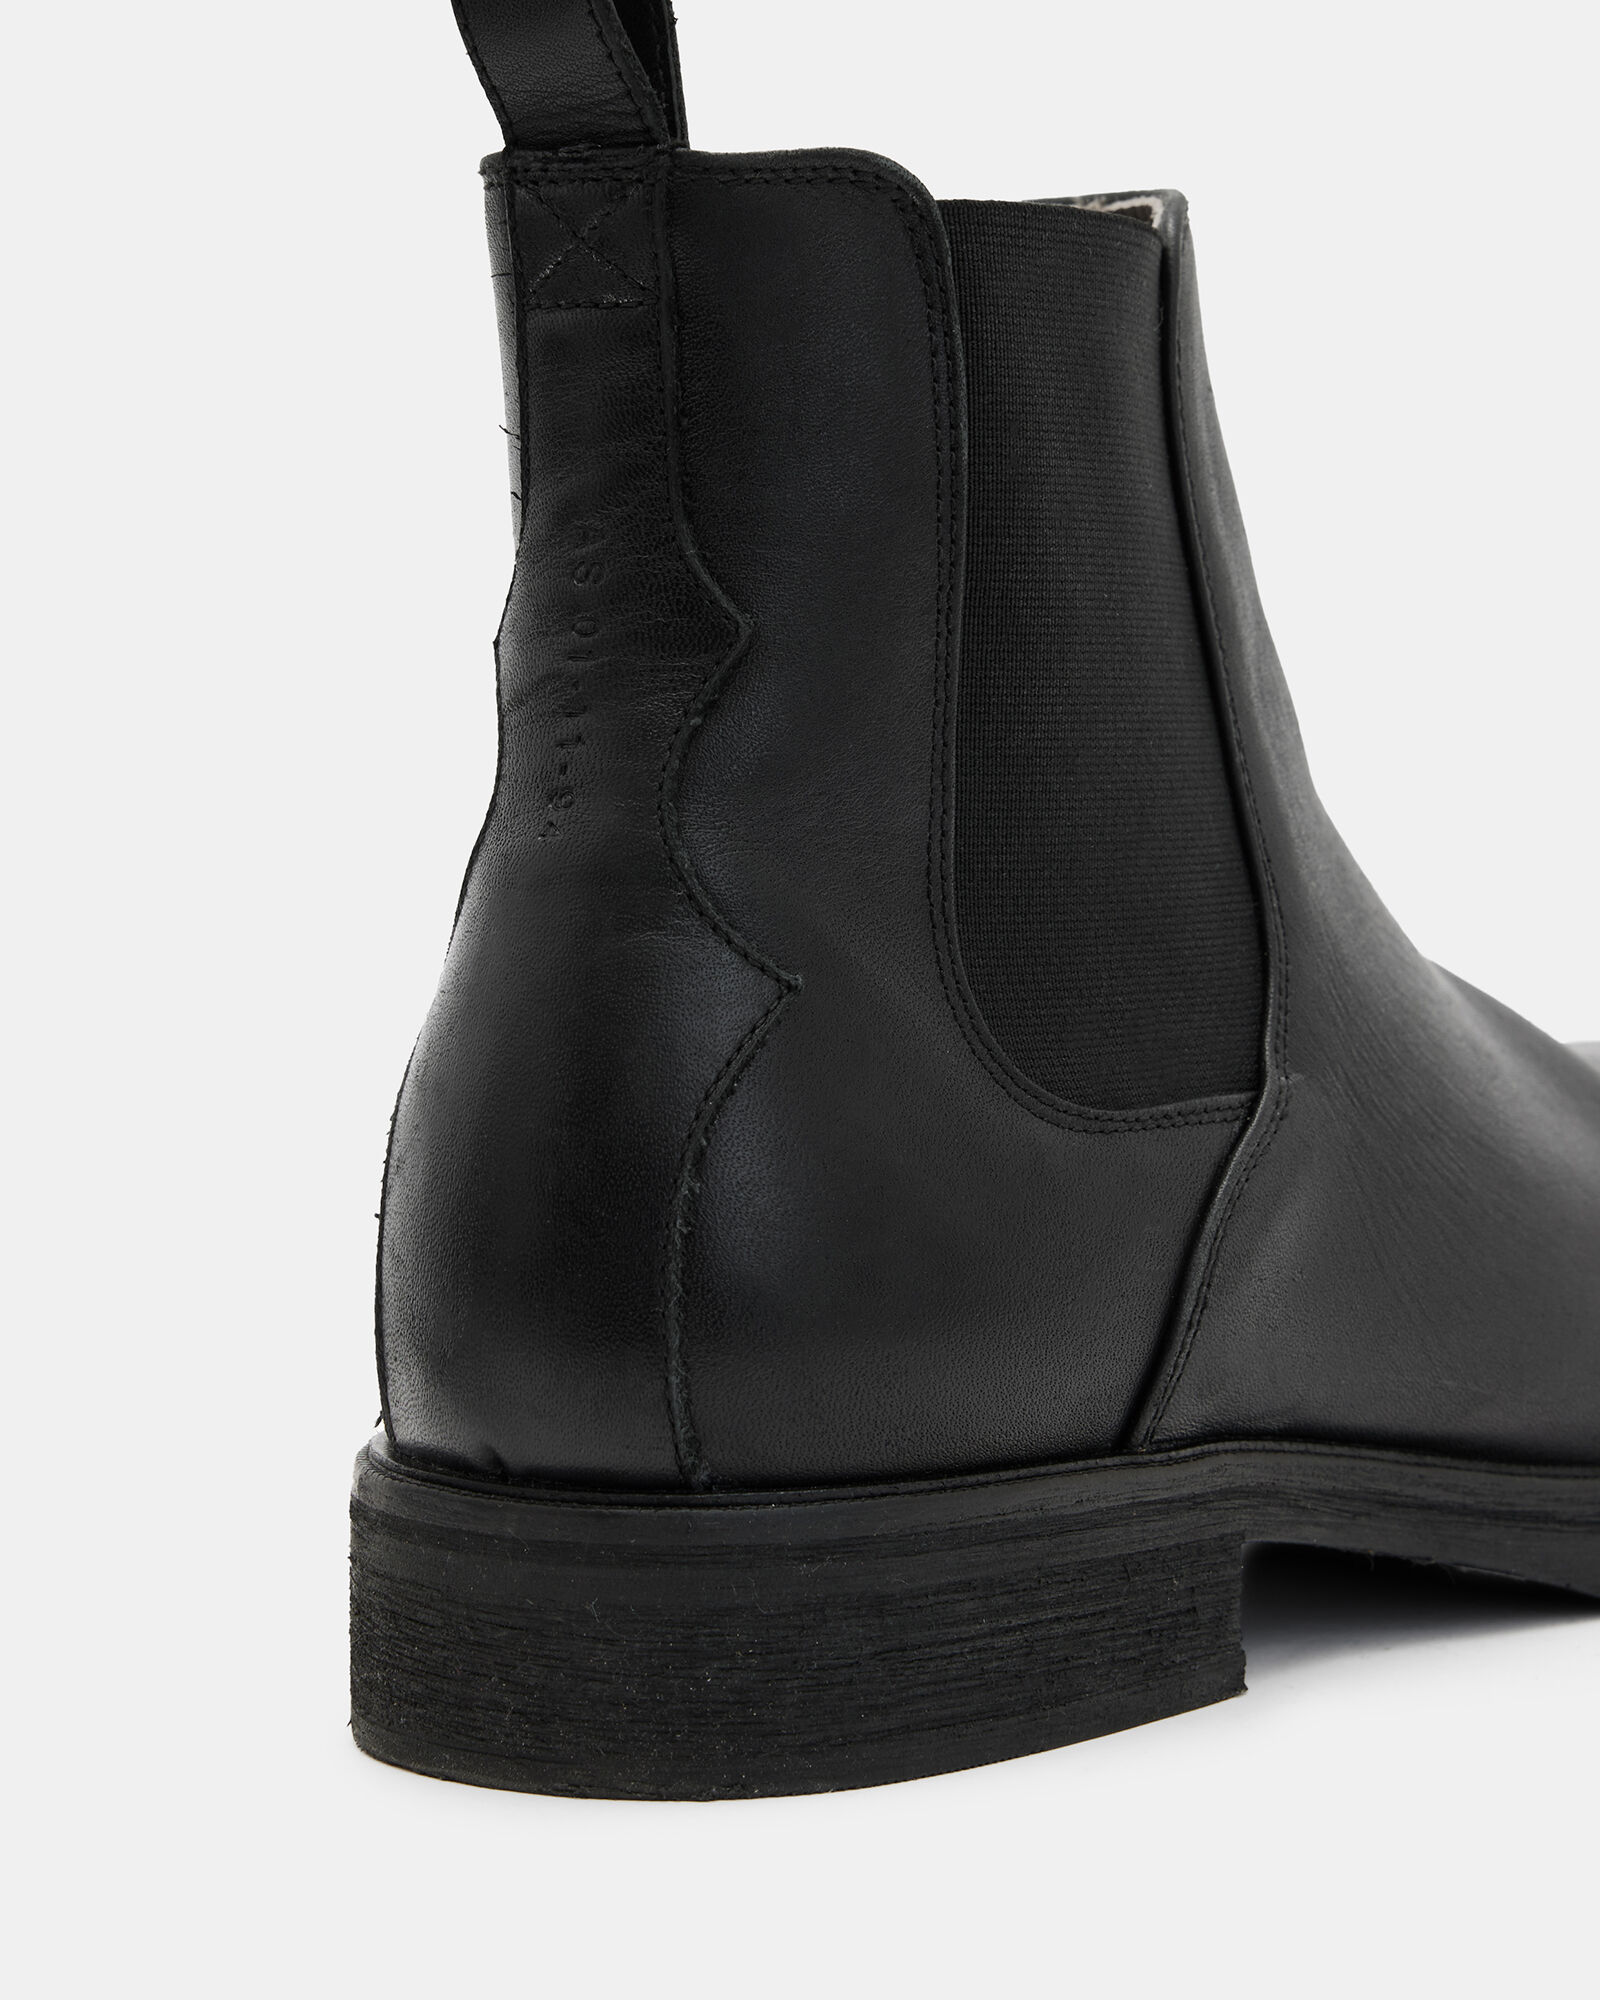 Creed Leather Chelsea Boots Black | ALLSAINTS